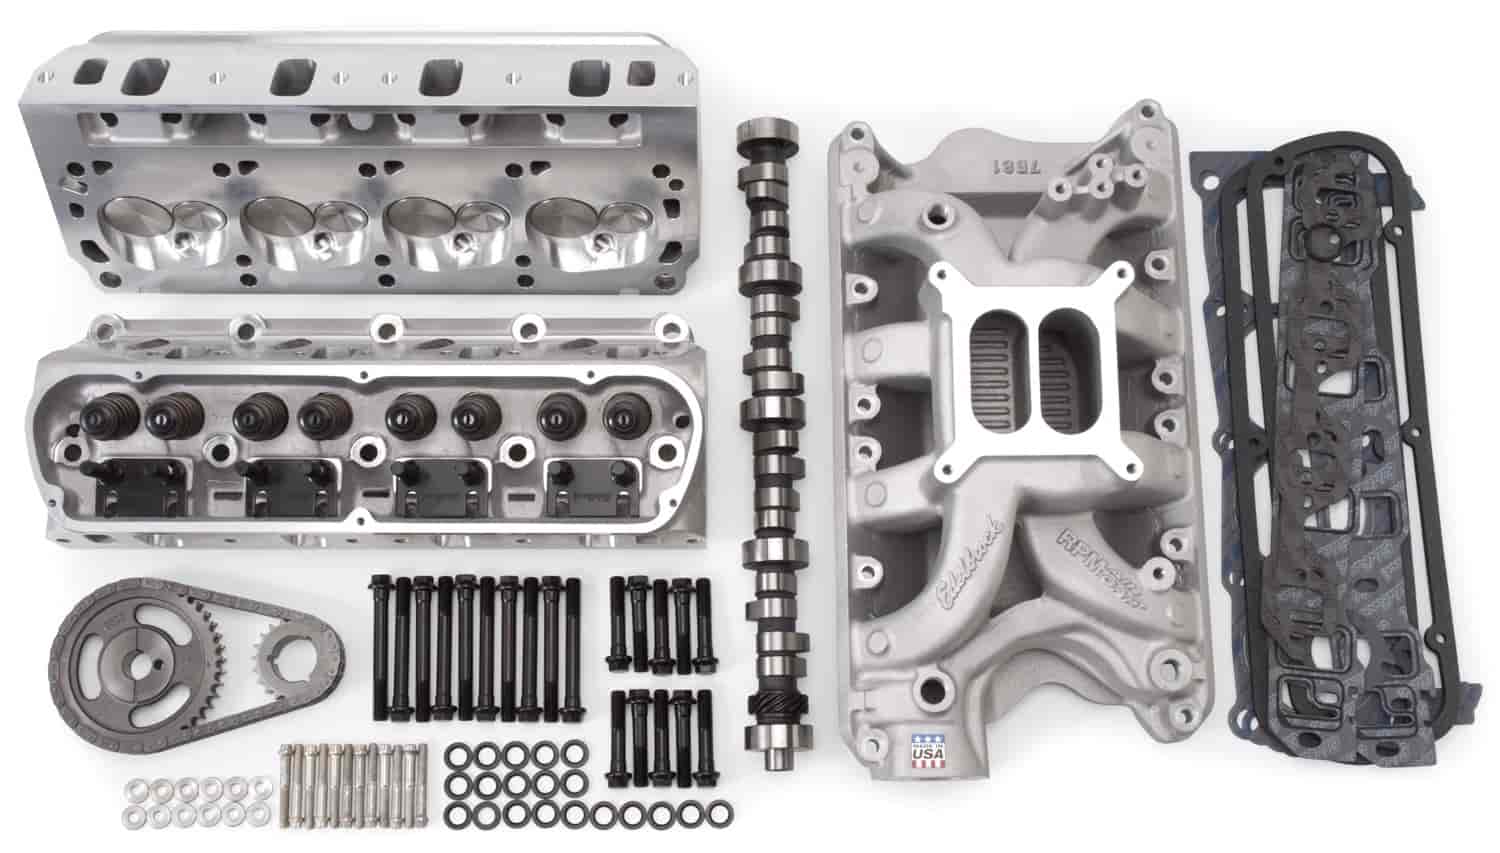 RPM Power Package Top End Kit for 1969-1995 Small Block Ford 351W with Endurashine Finish